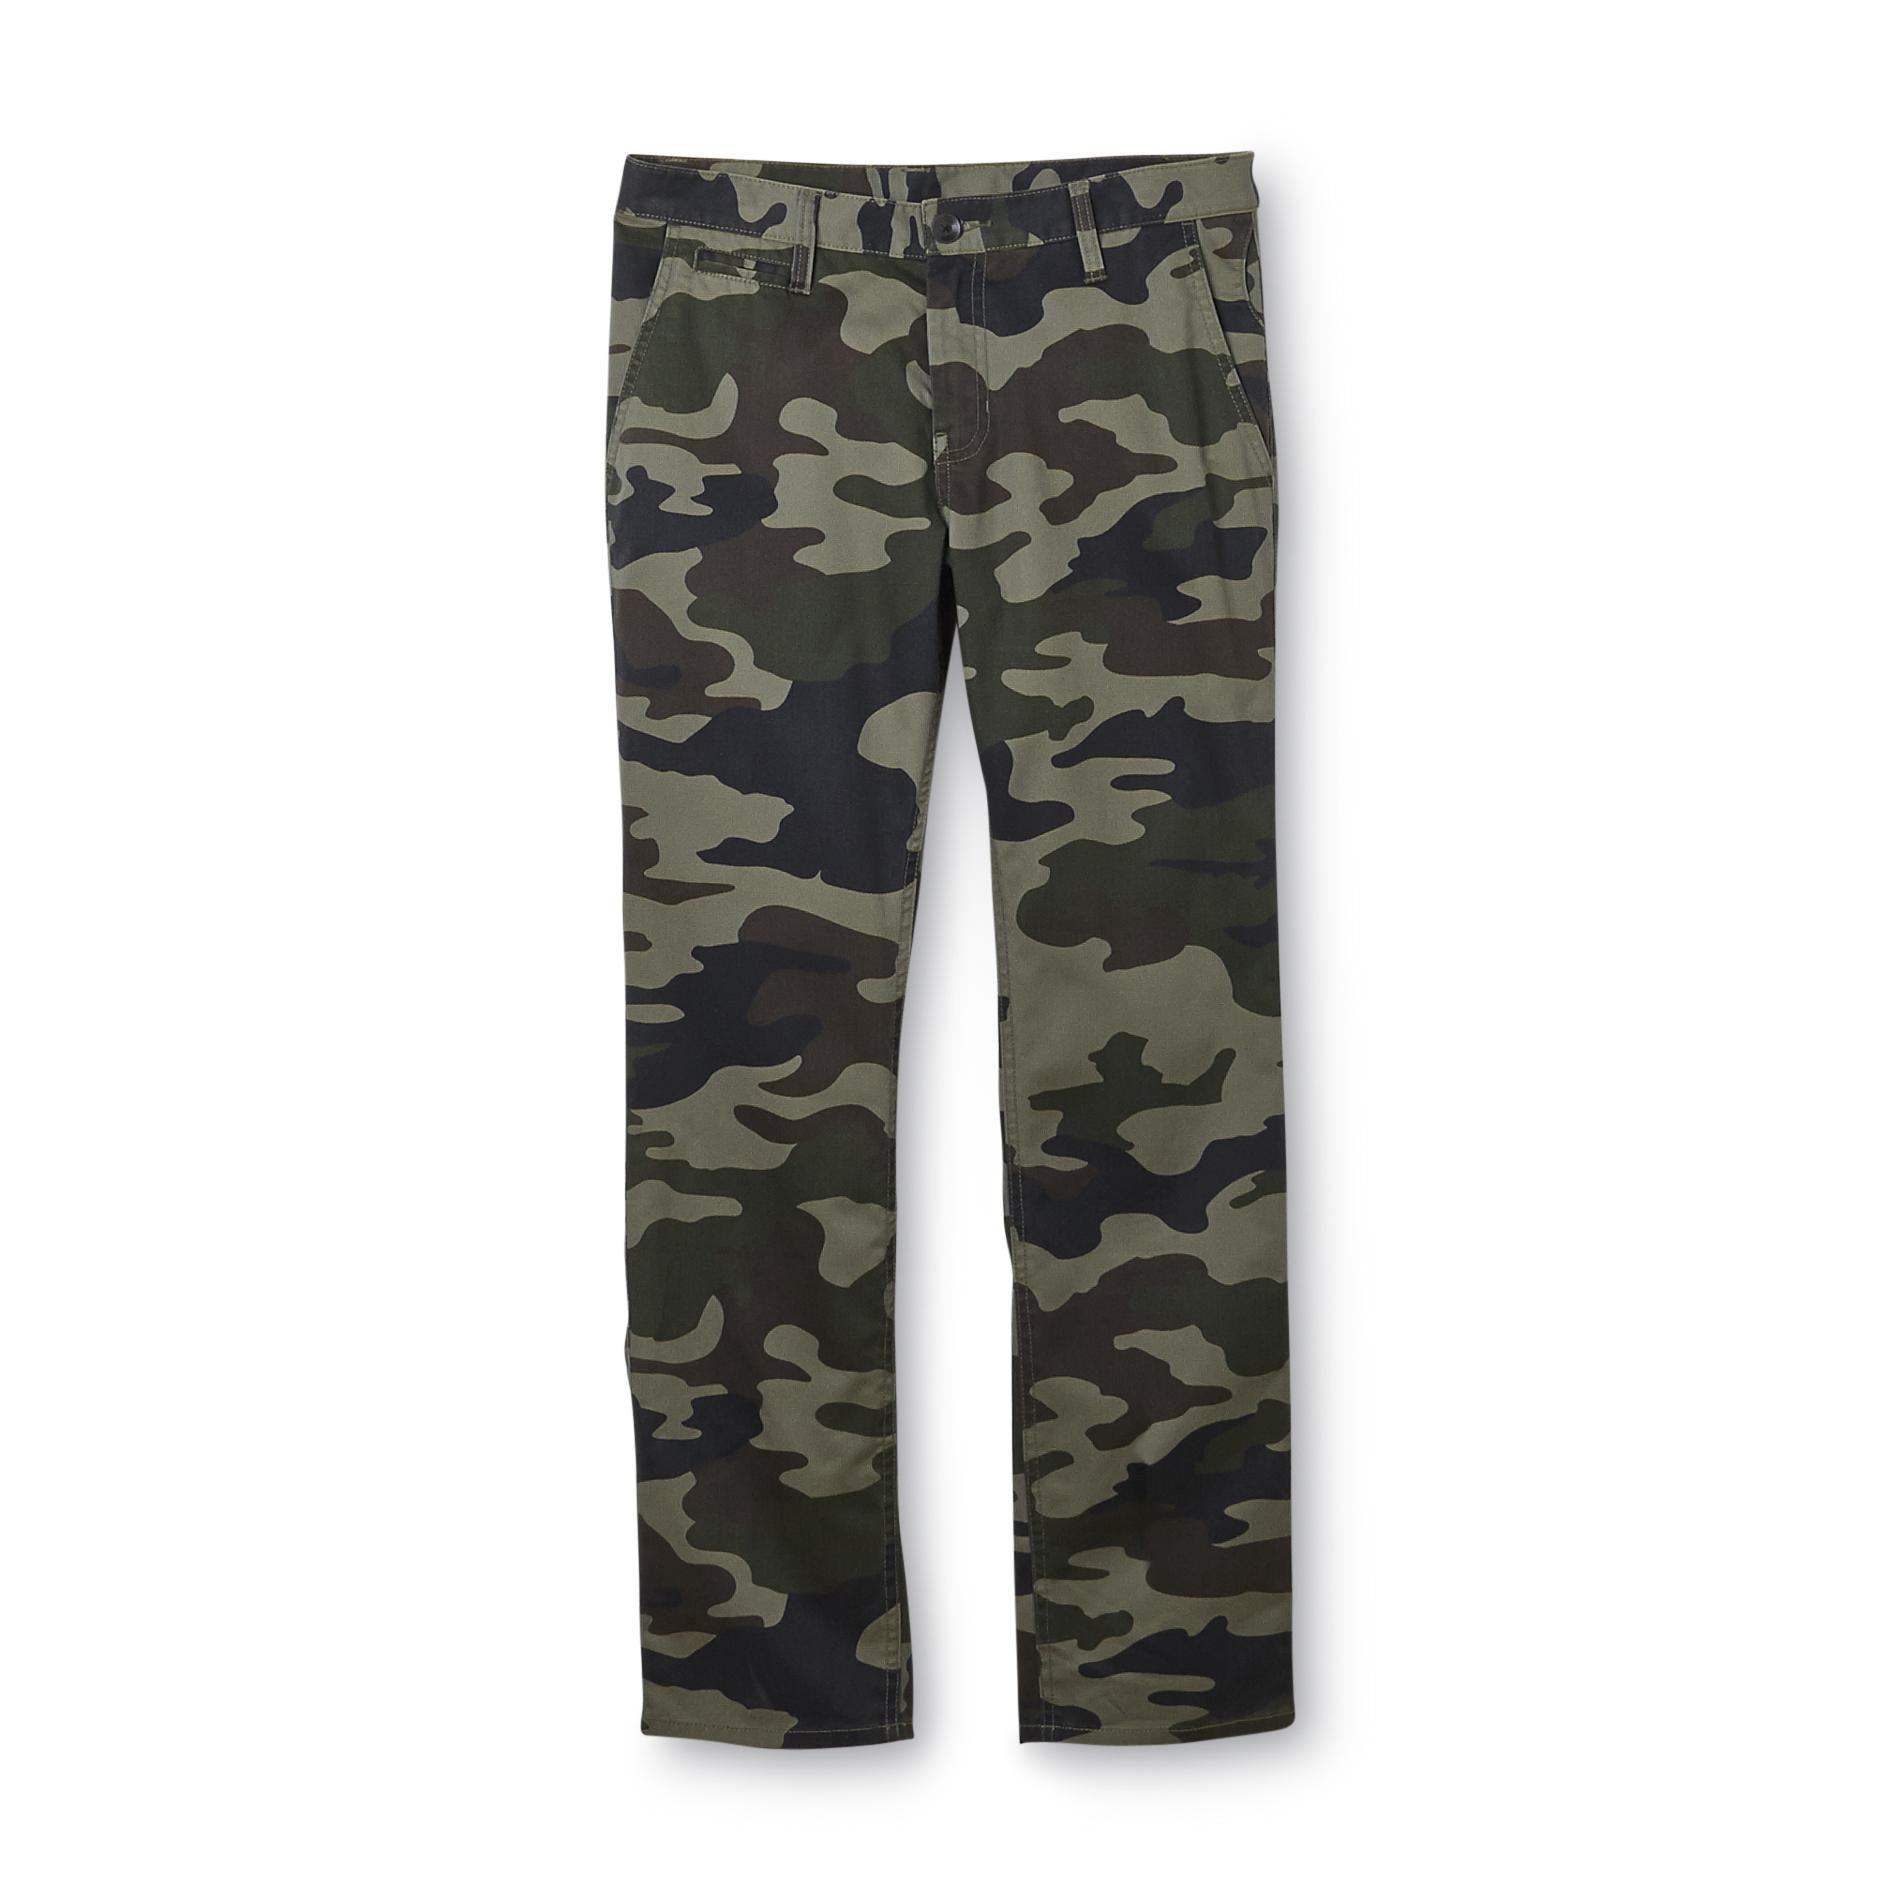 Amplify Young Men's Twill Pants - Camouflage